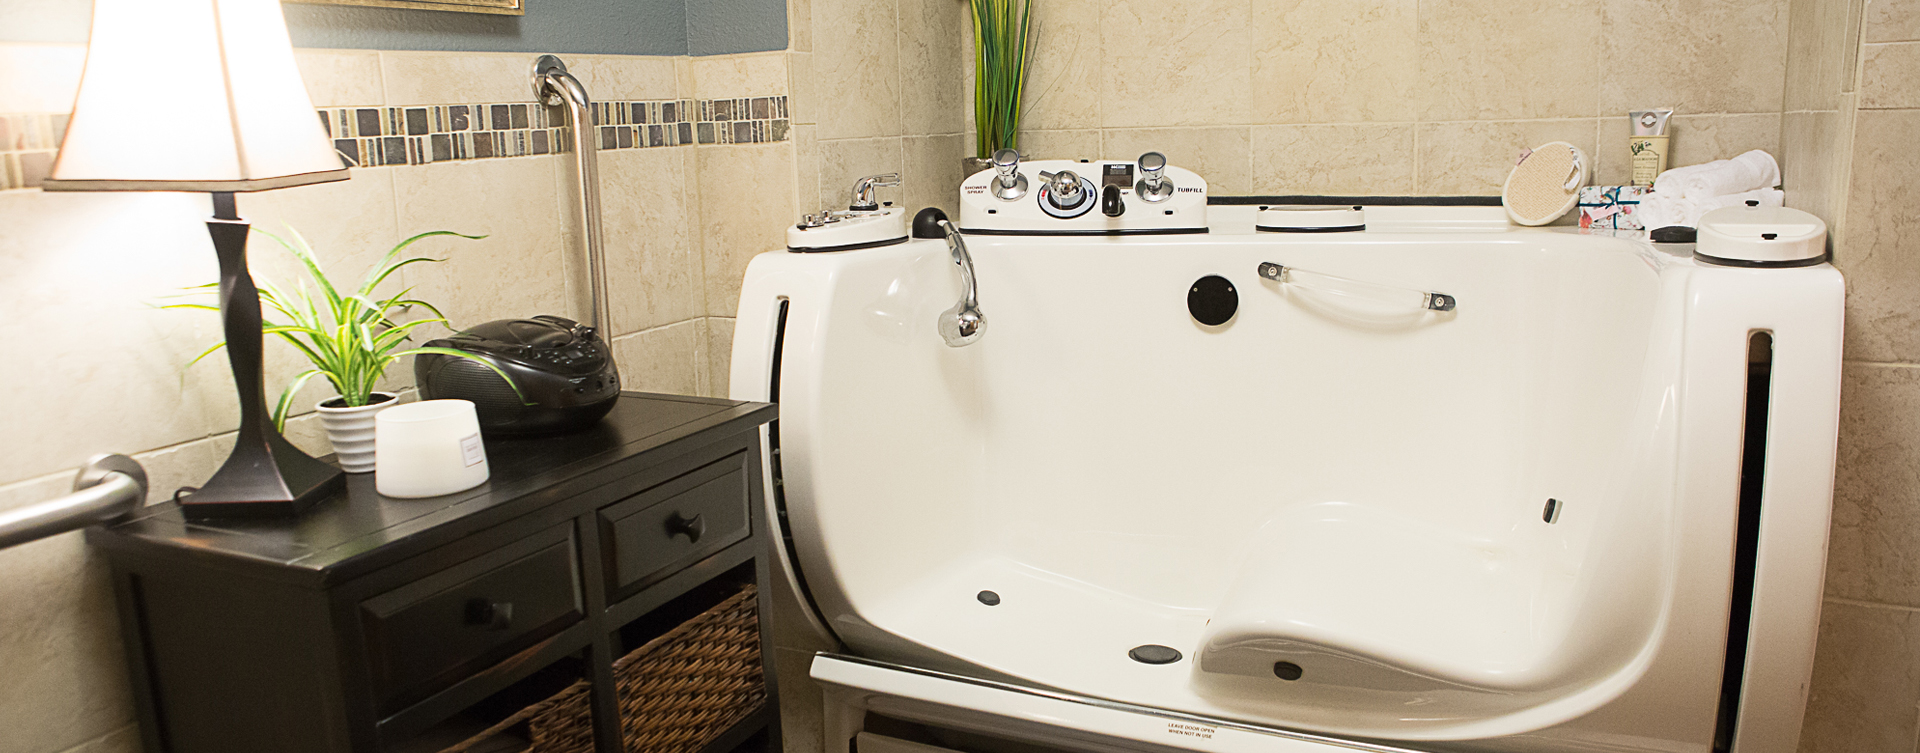 With an easy access design, our whirlpool allows you to enjoy a warm bath safely and comfortably at Bickford of Clinton